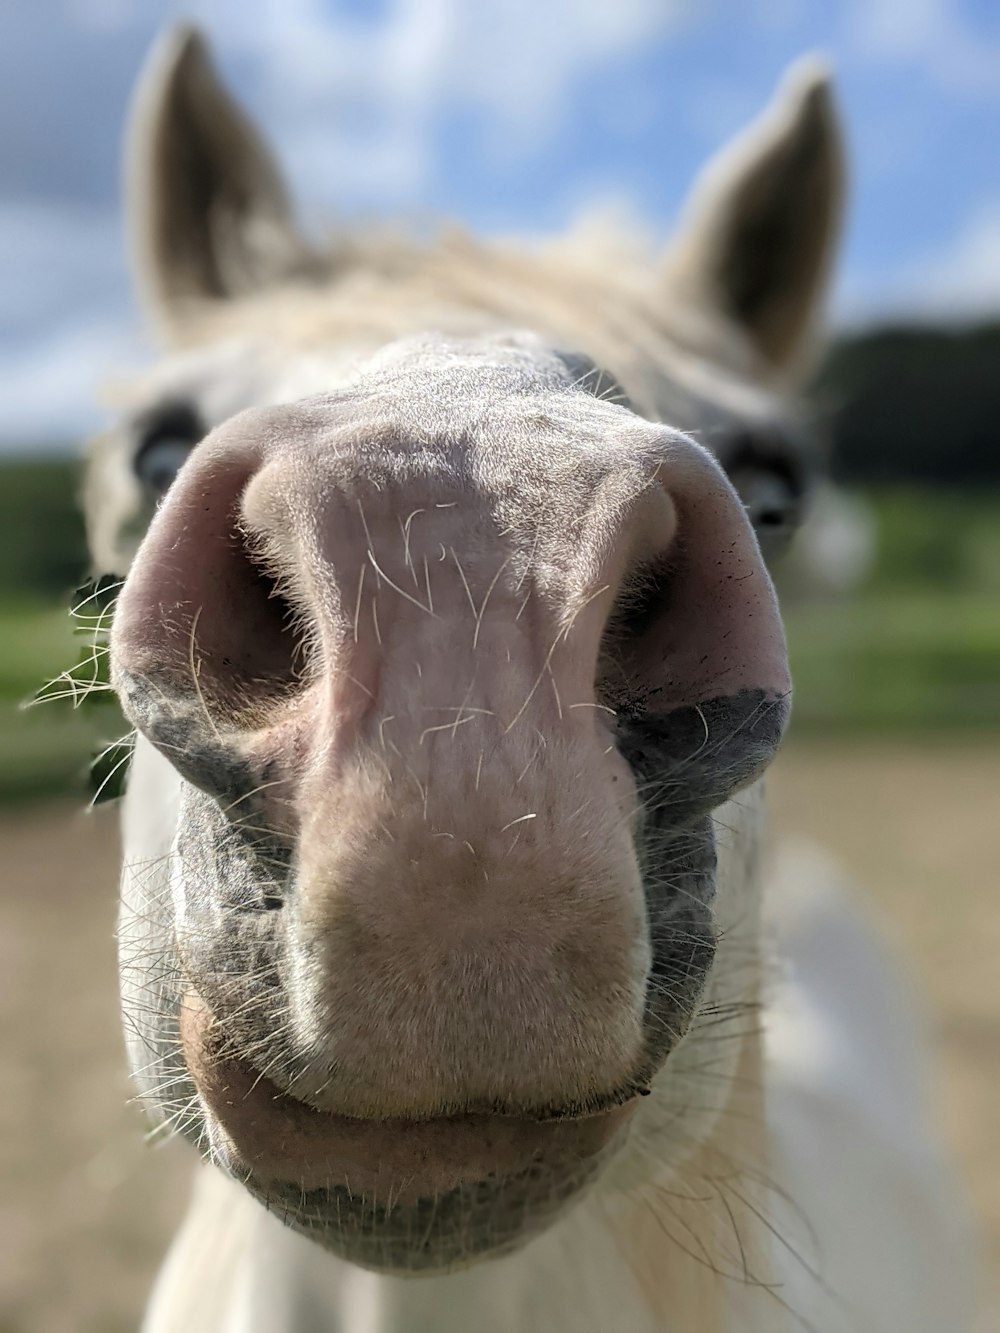 a close up of a horse's face with a sky background